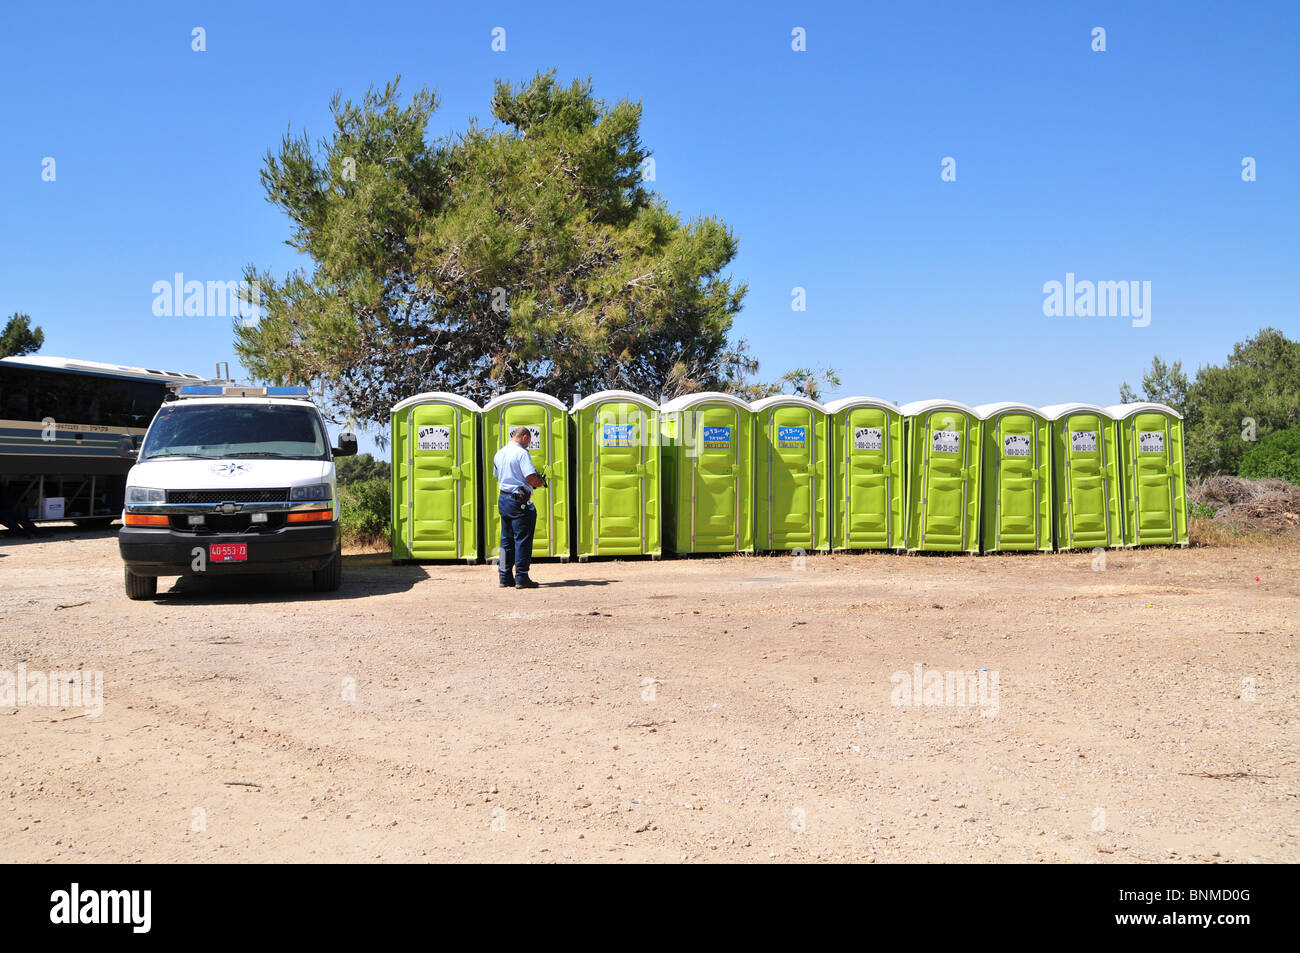 Israel, Public restrooms chemical toilets in an open air event, Stock Photo